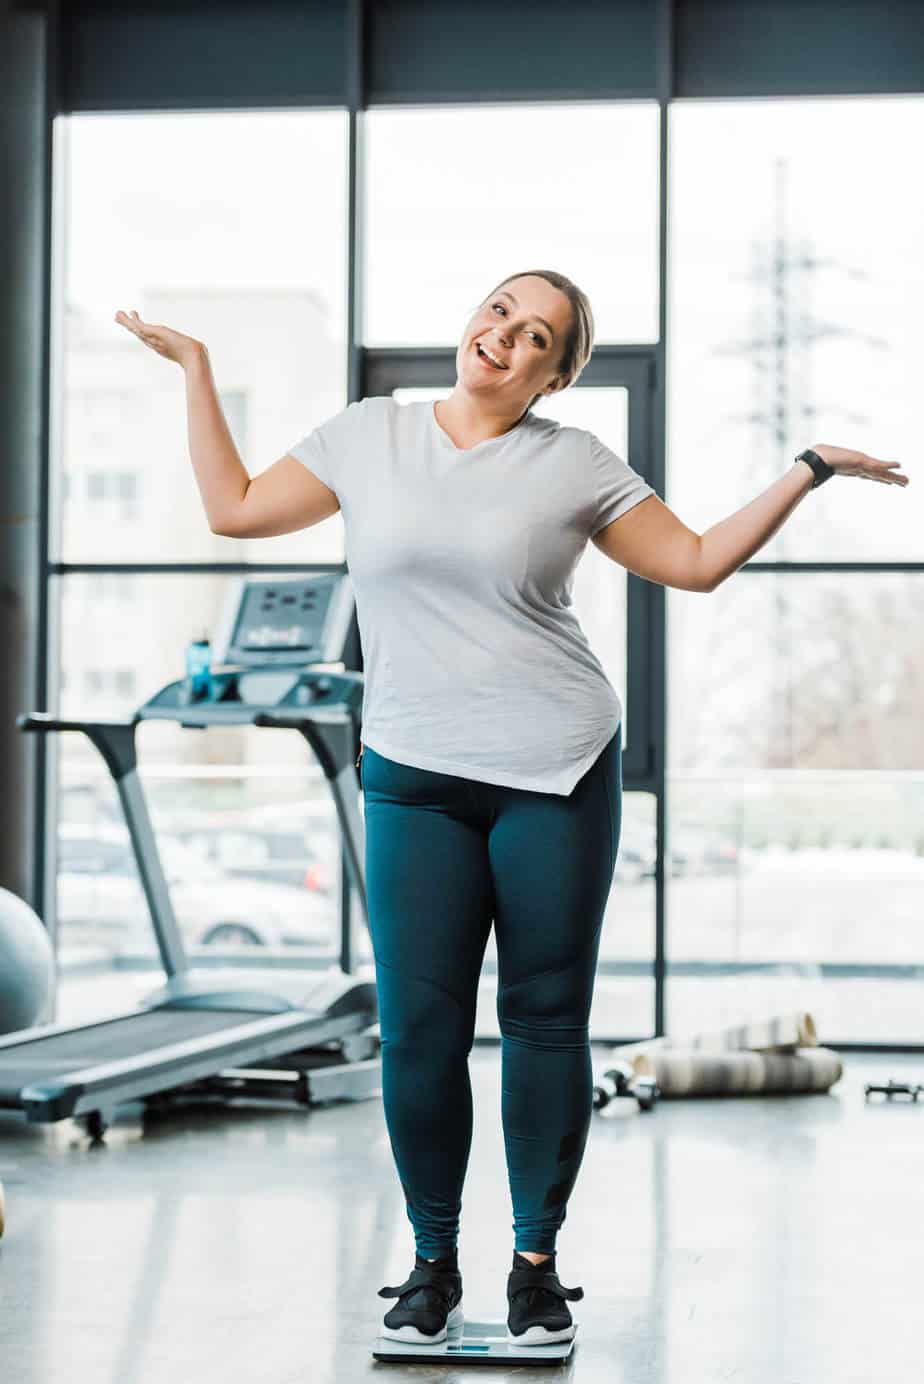 Happy woman at the gym.  Working out can give you better results with intermittent fasting.  